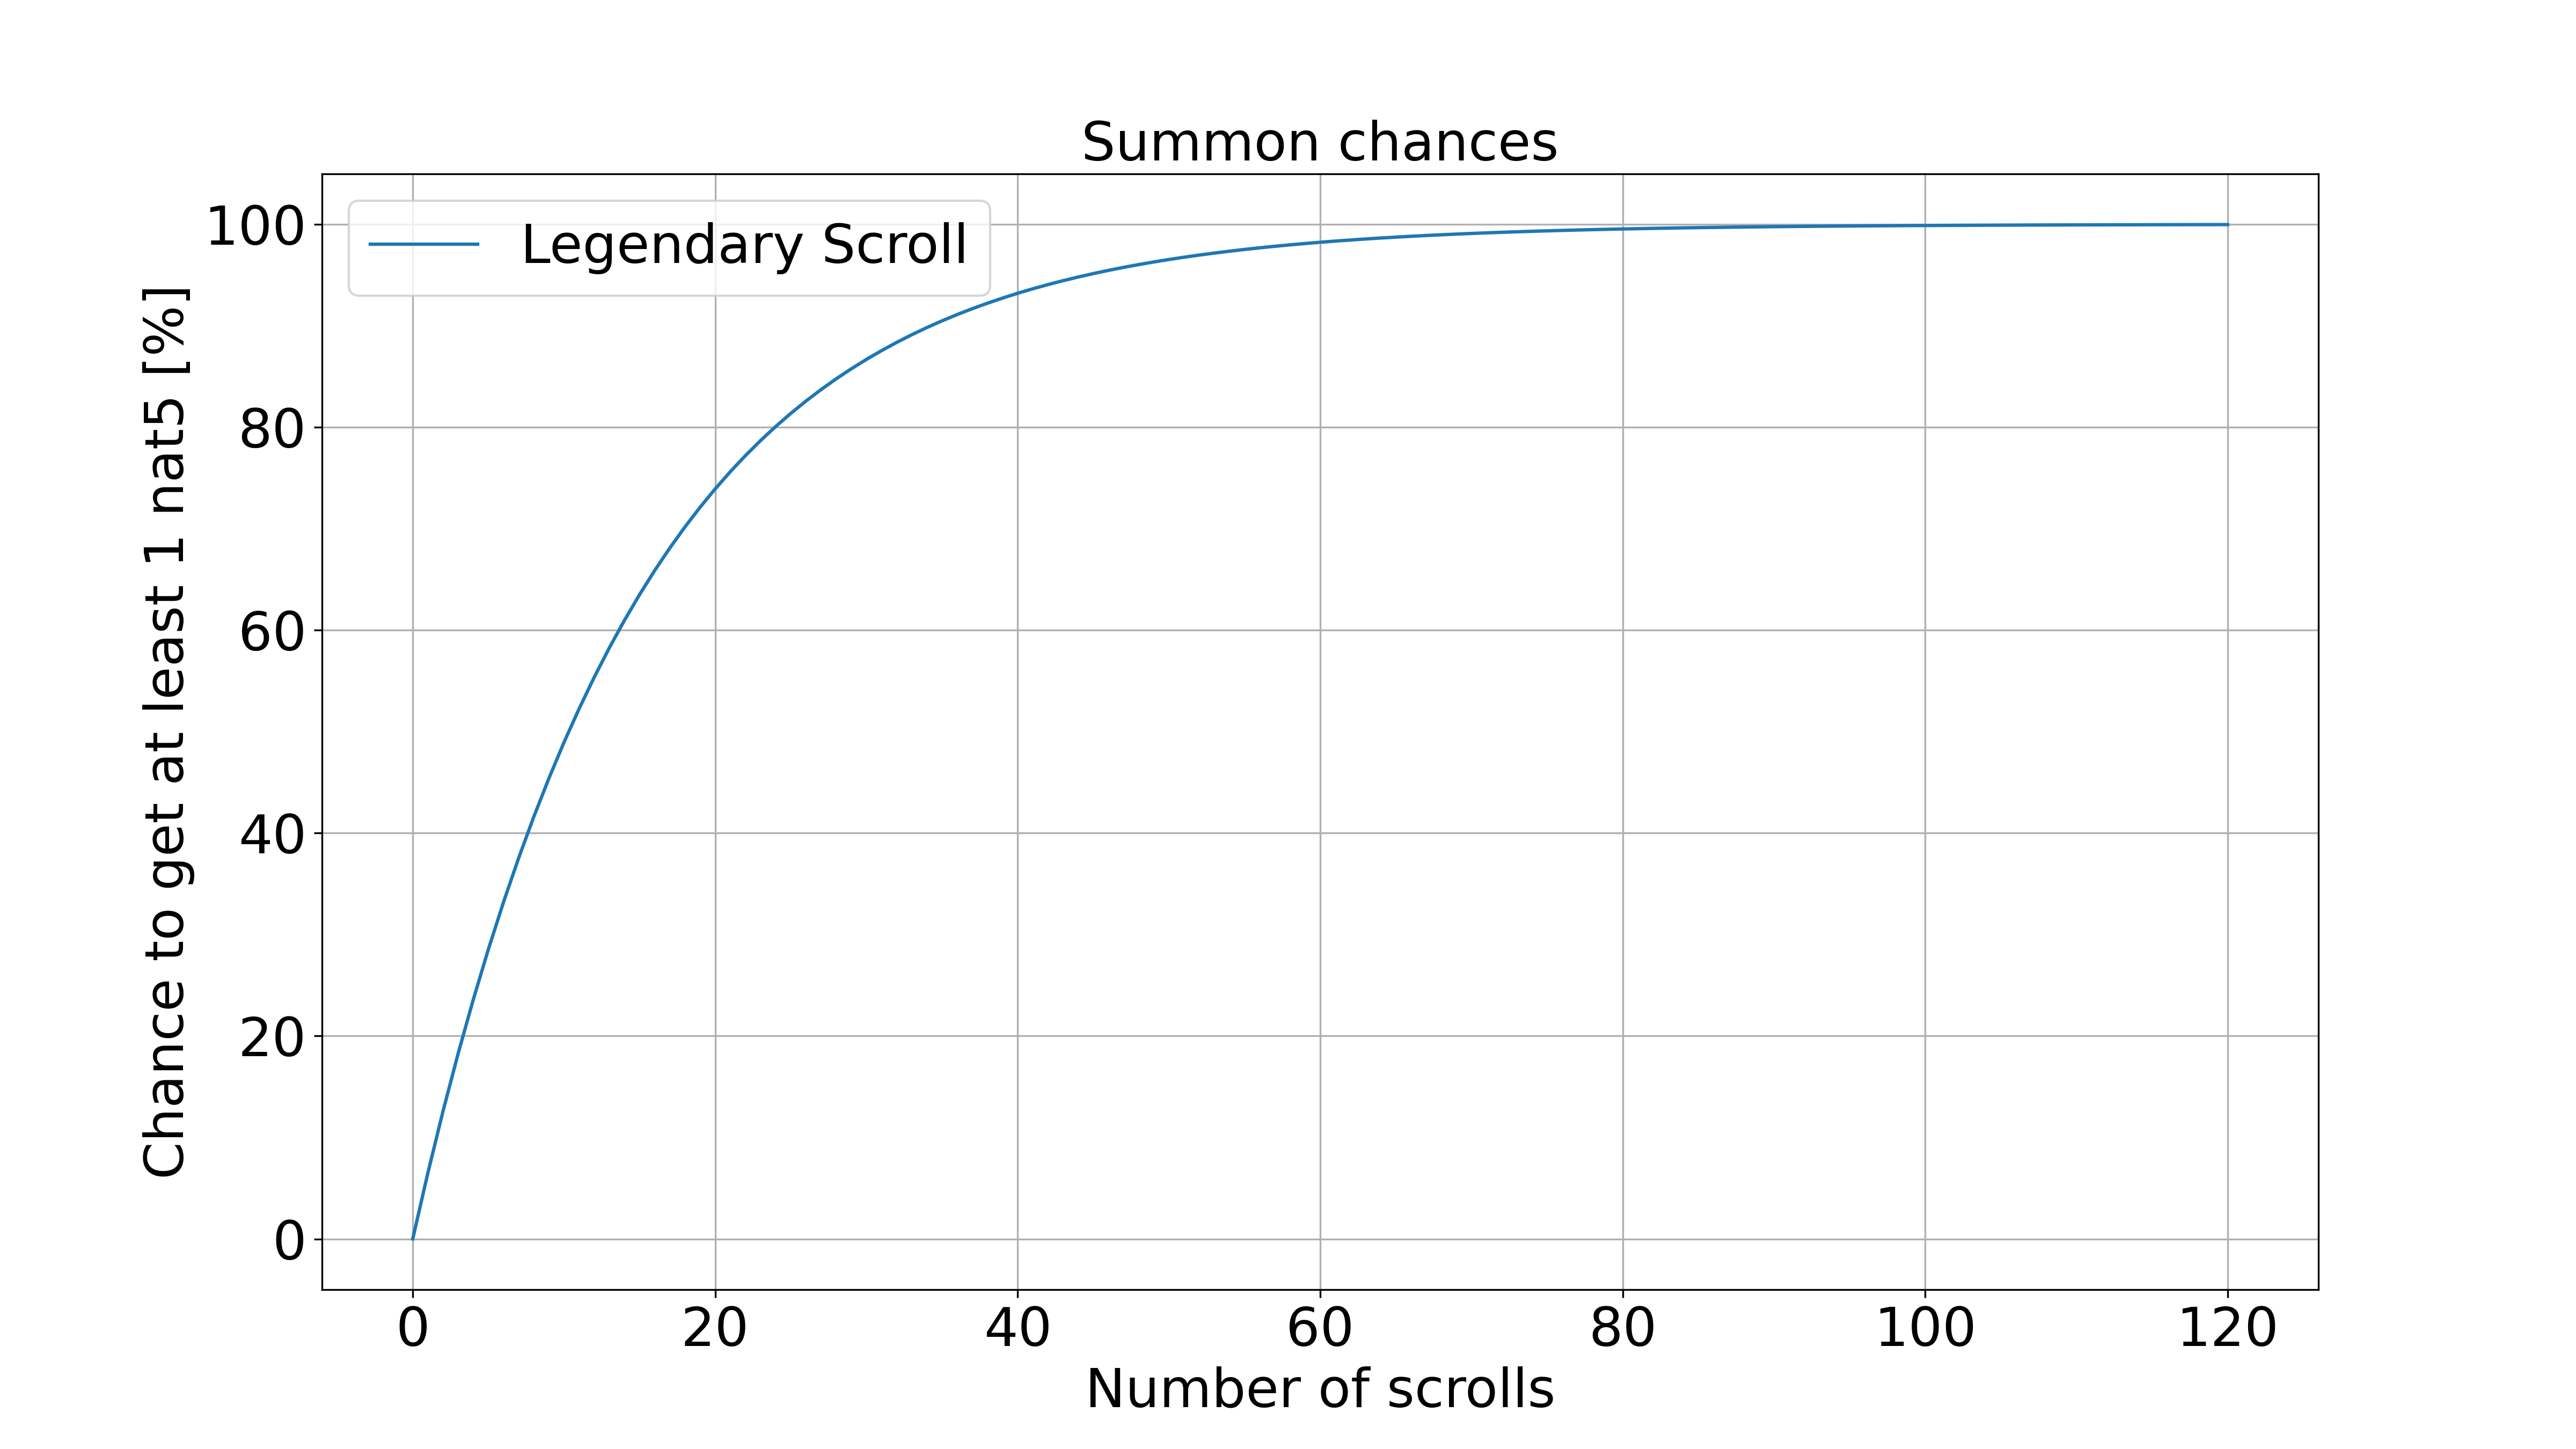 Summon chances for LS